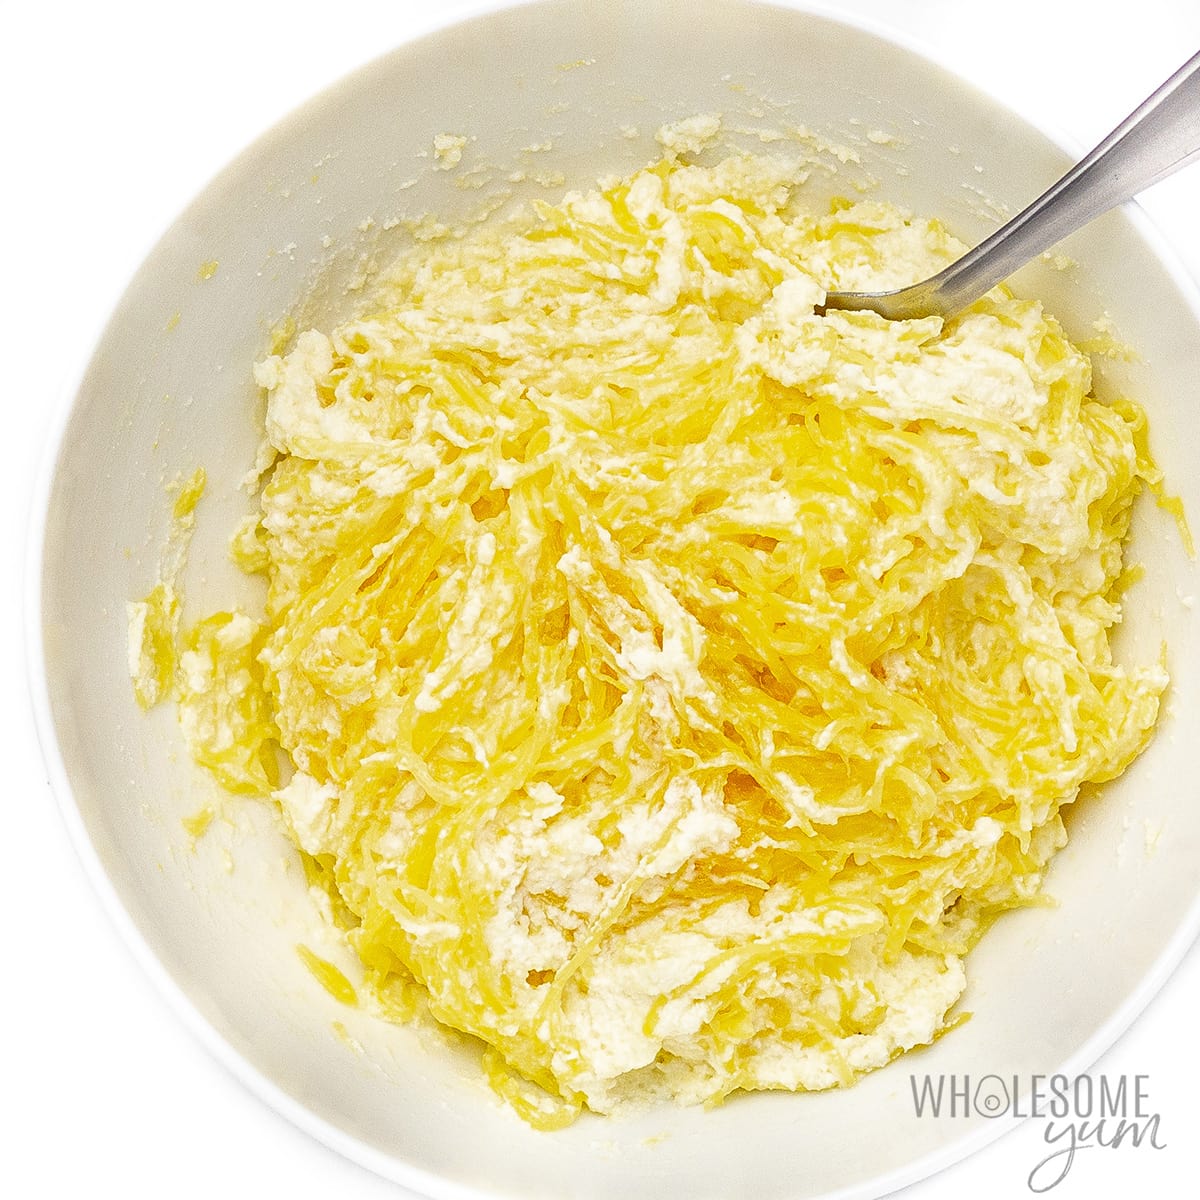 Spaghetti squash strands stirred together with cheese mixture.